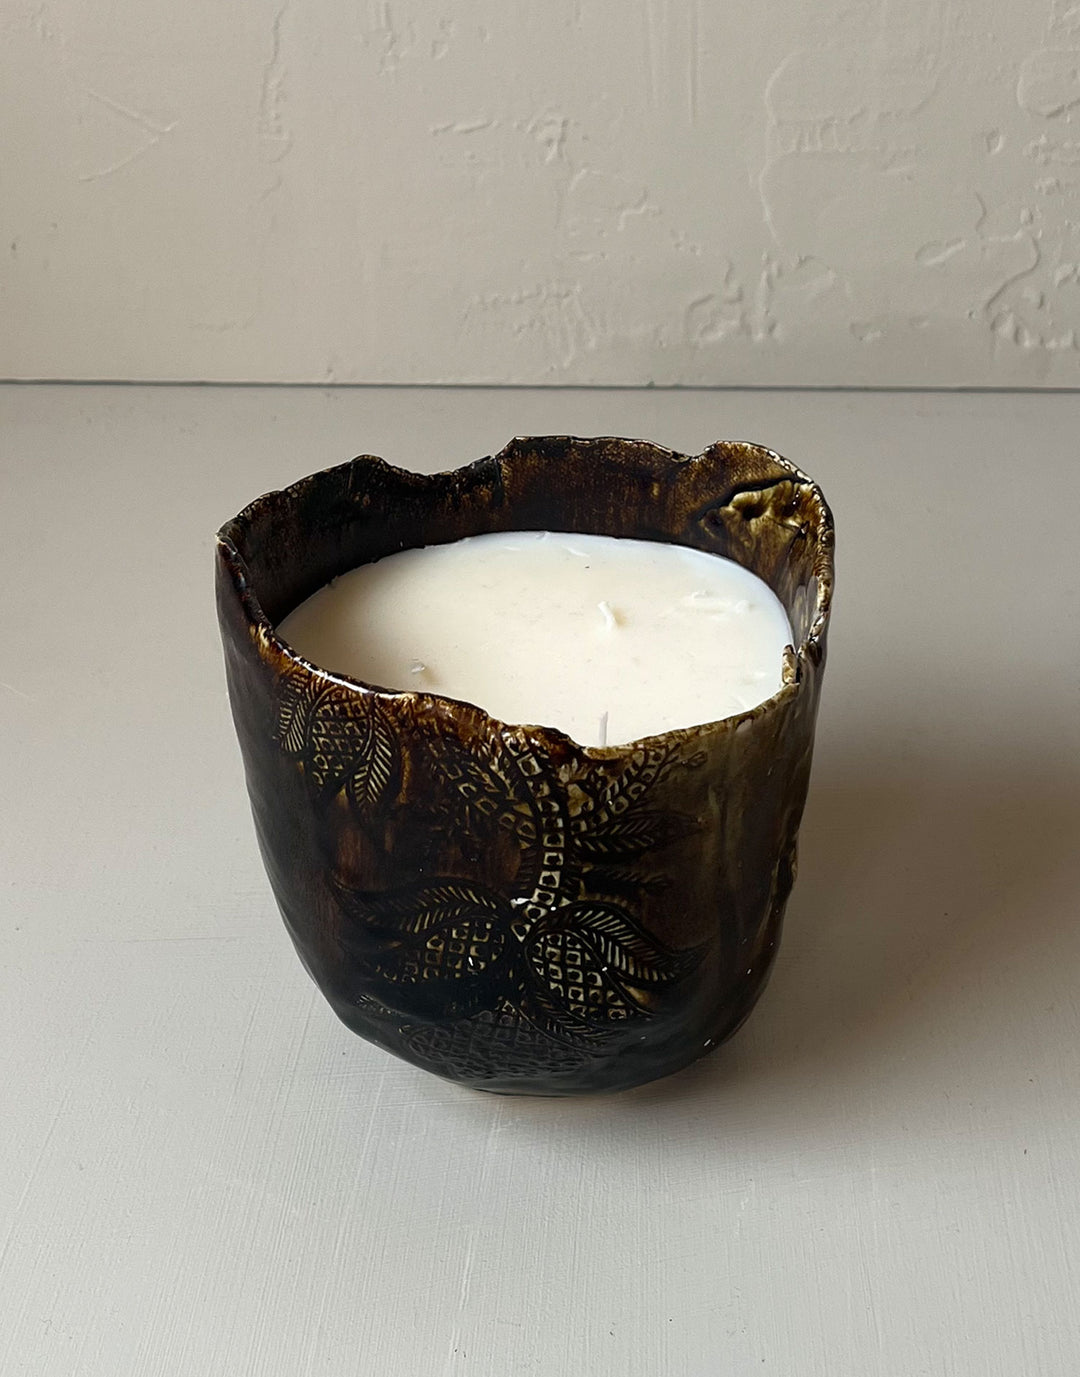 DBO + Night Space / One of a kind Vessel Candle